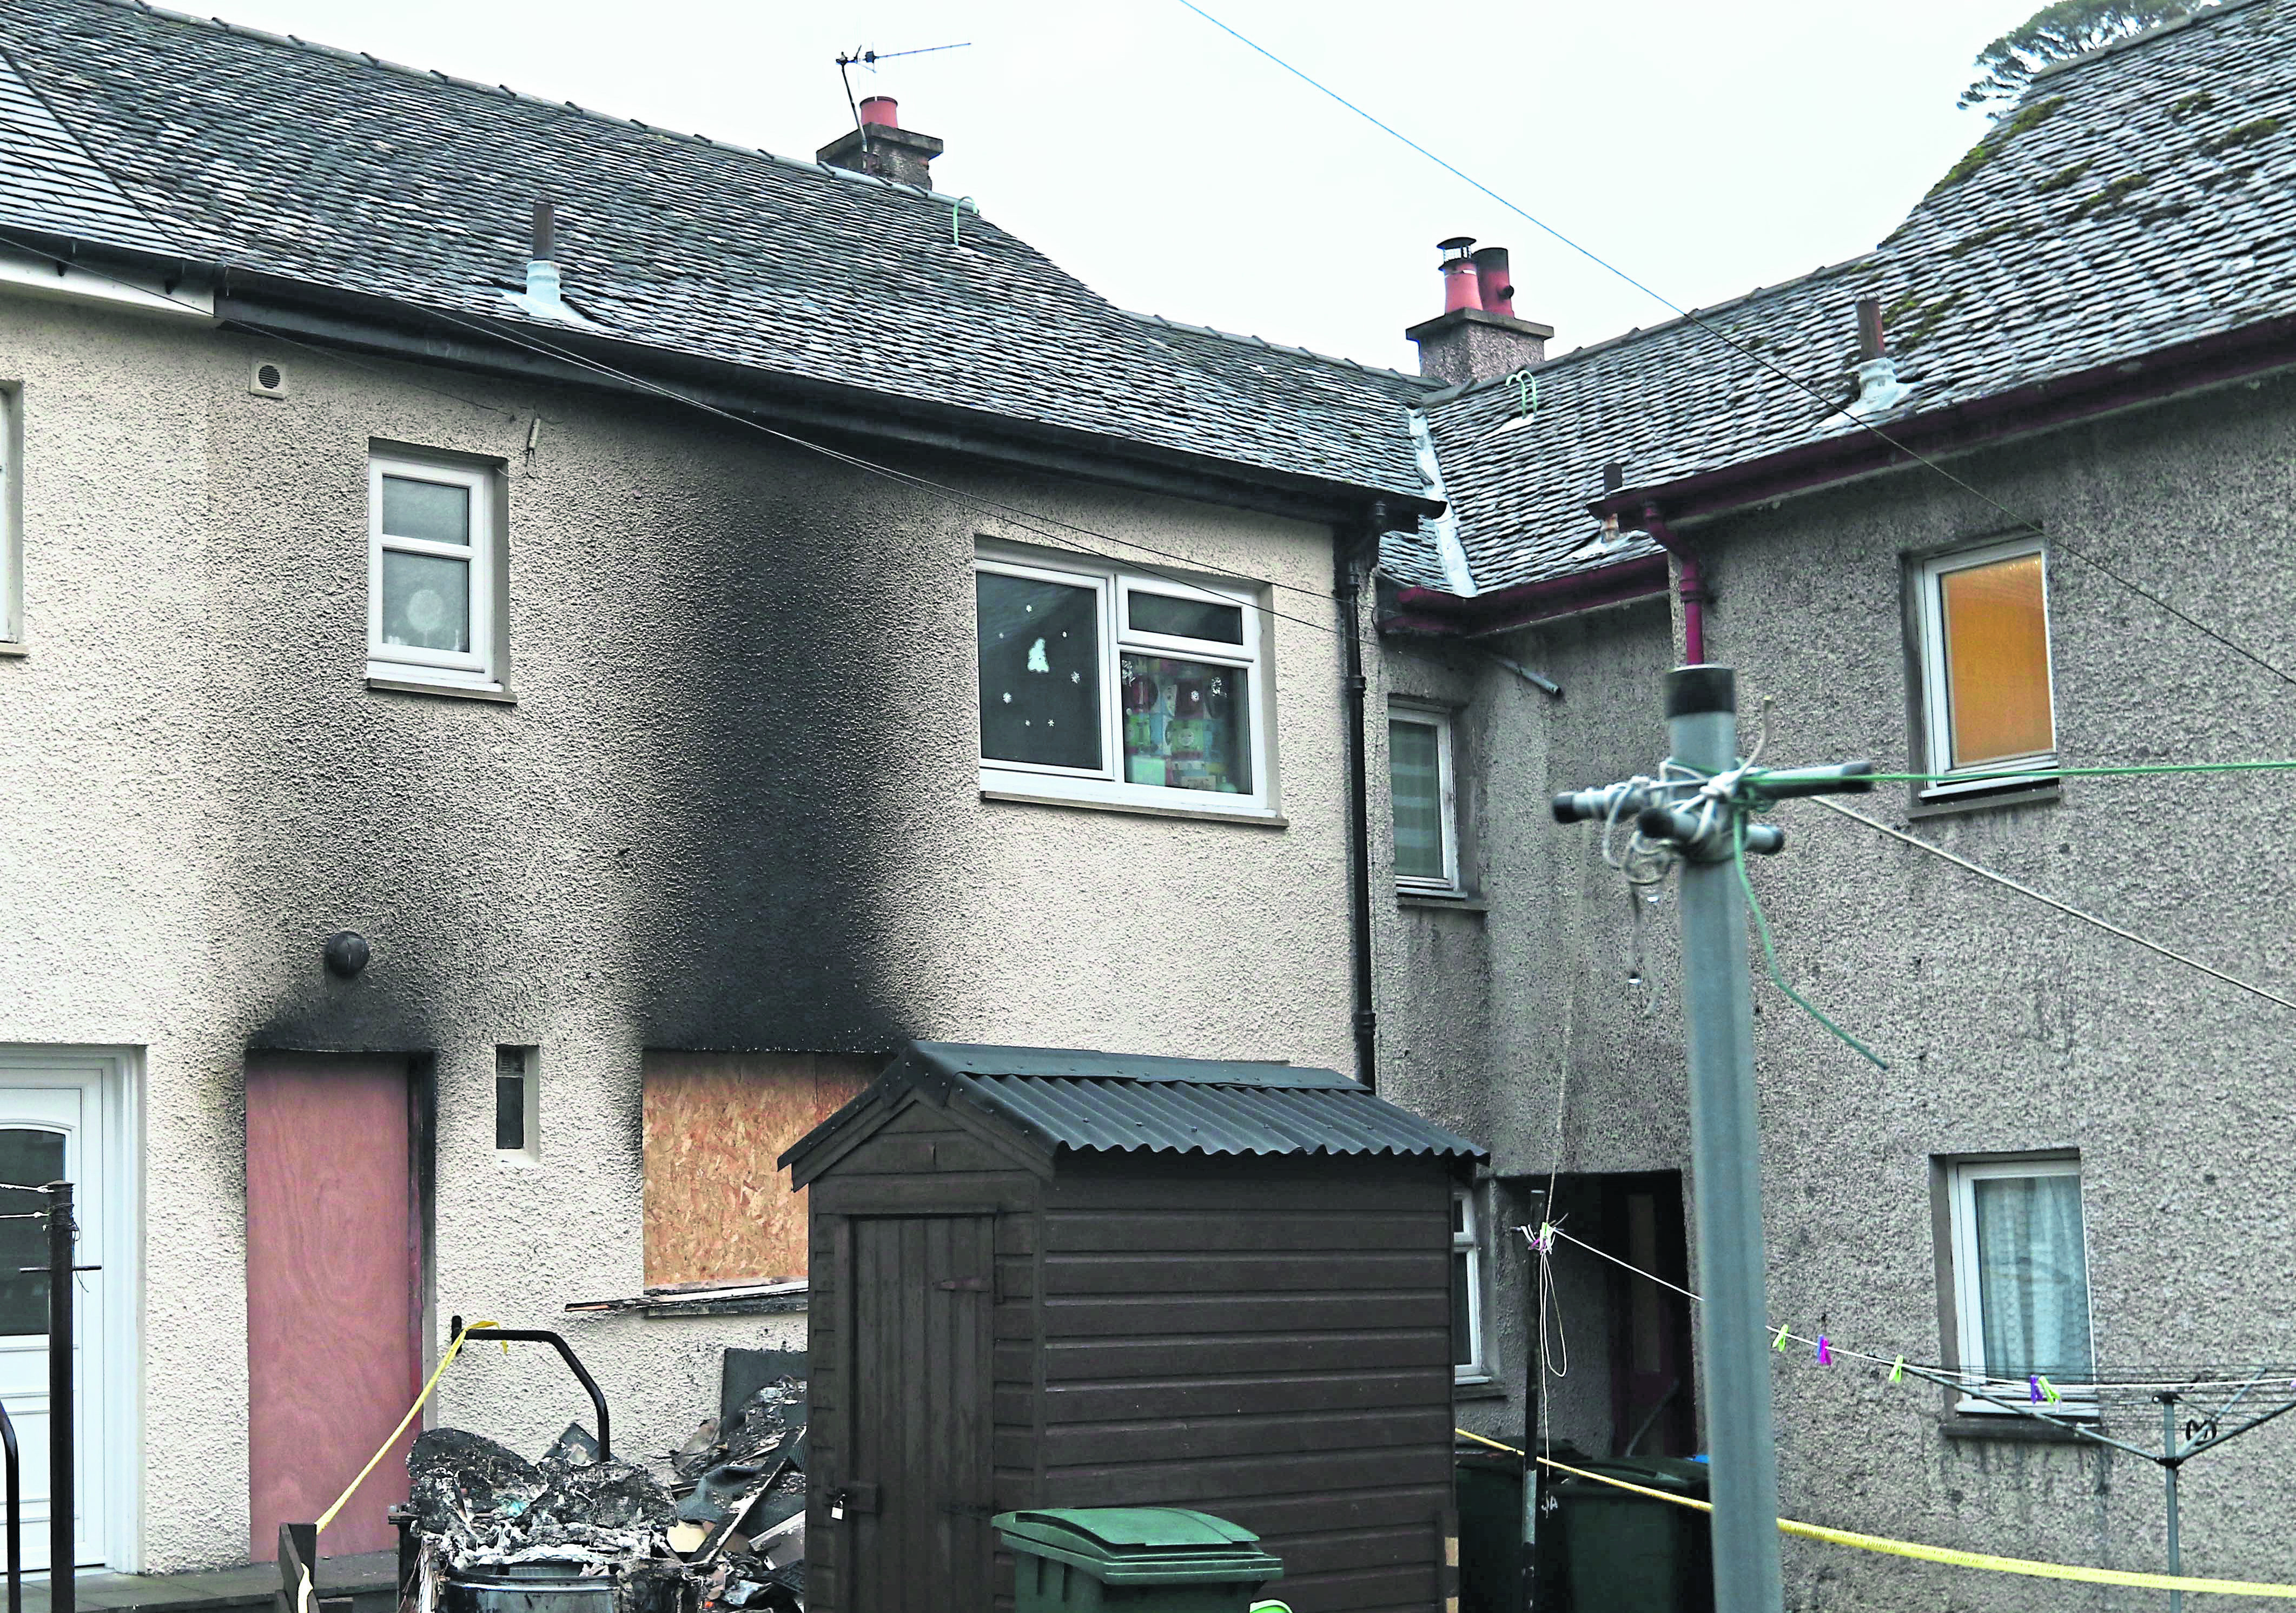 The fire damaged property in Oban.